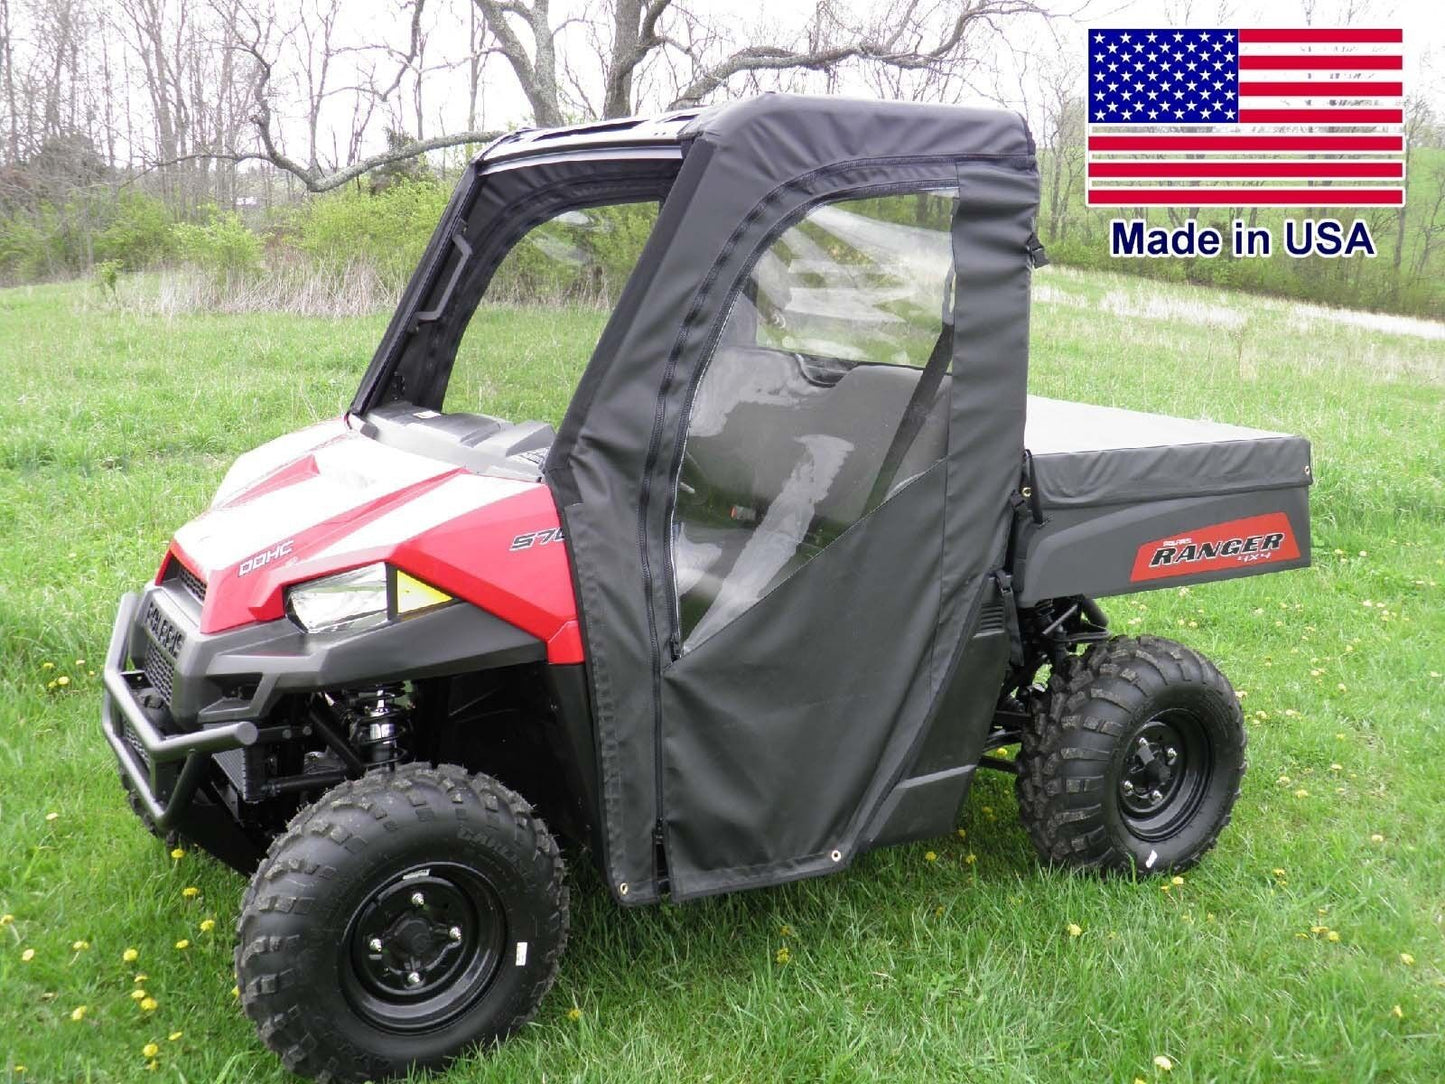 DOORS for Polaris Ranger 570 Mid Size - Soft Material - Travels Highway Speed